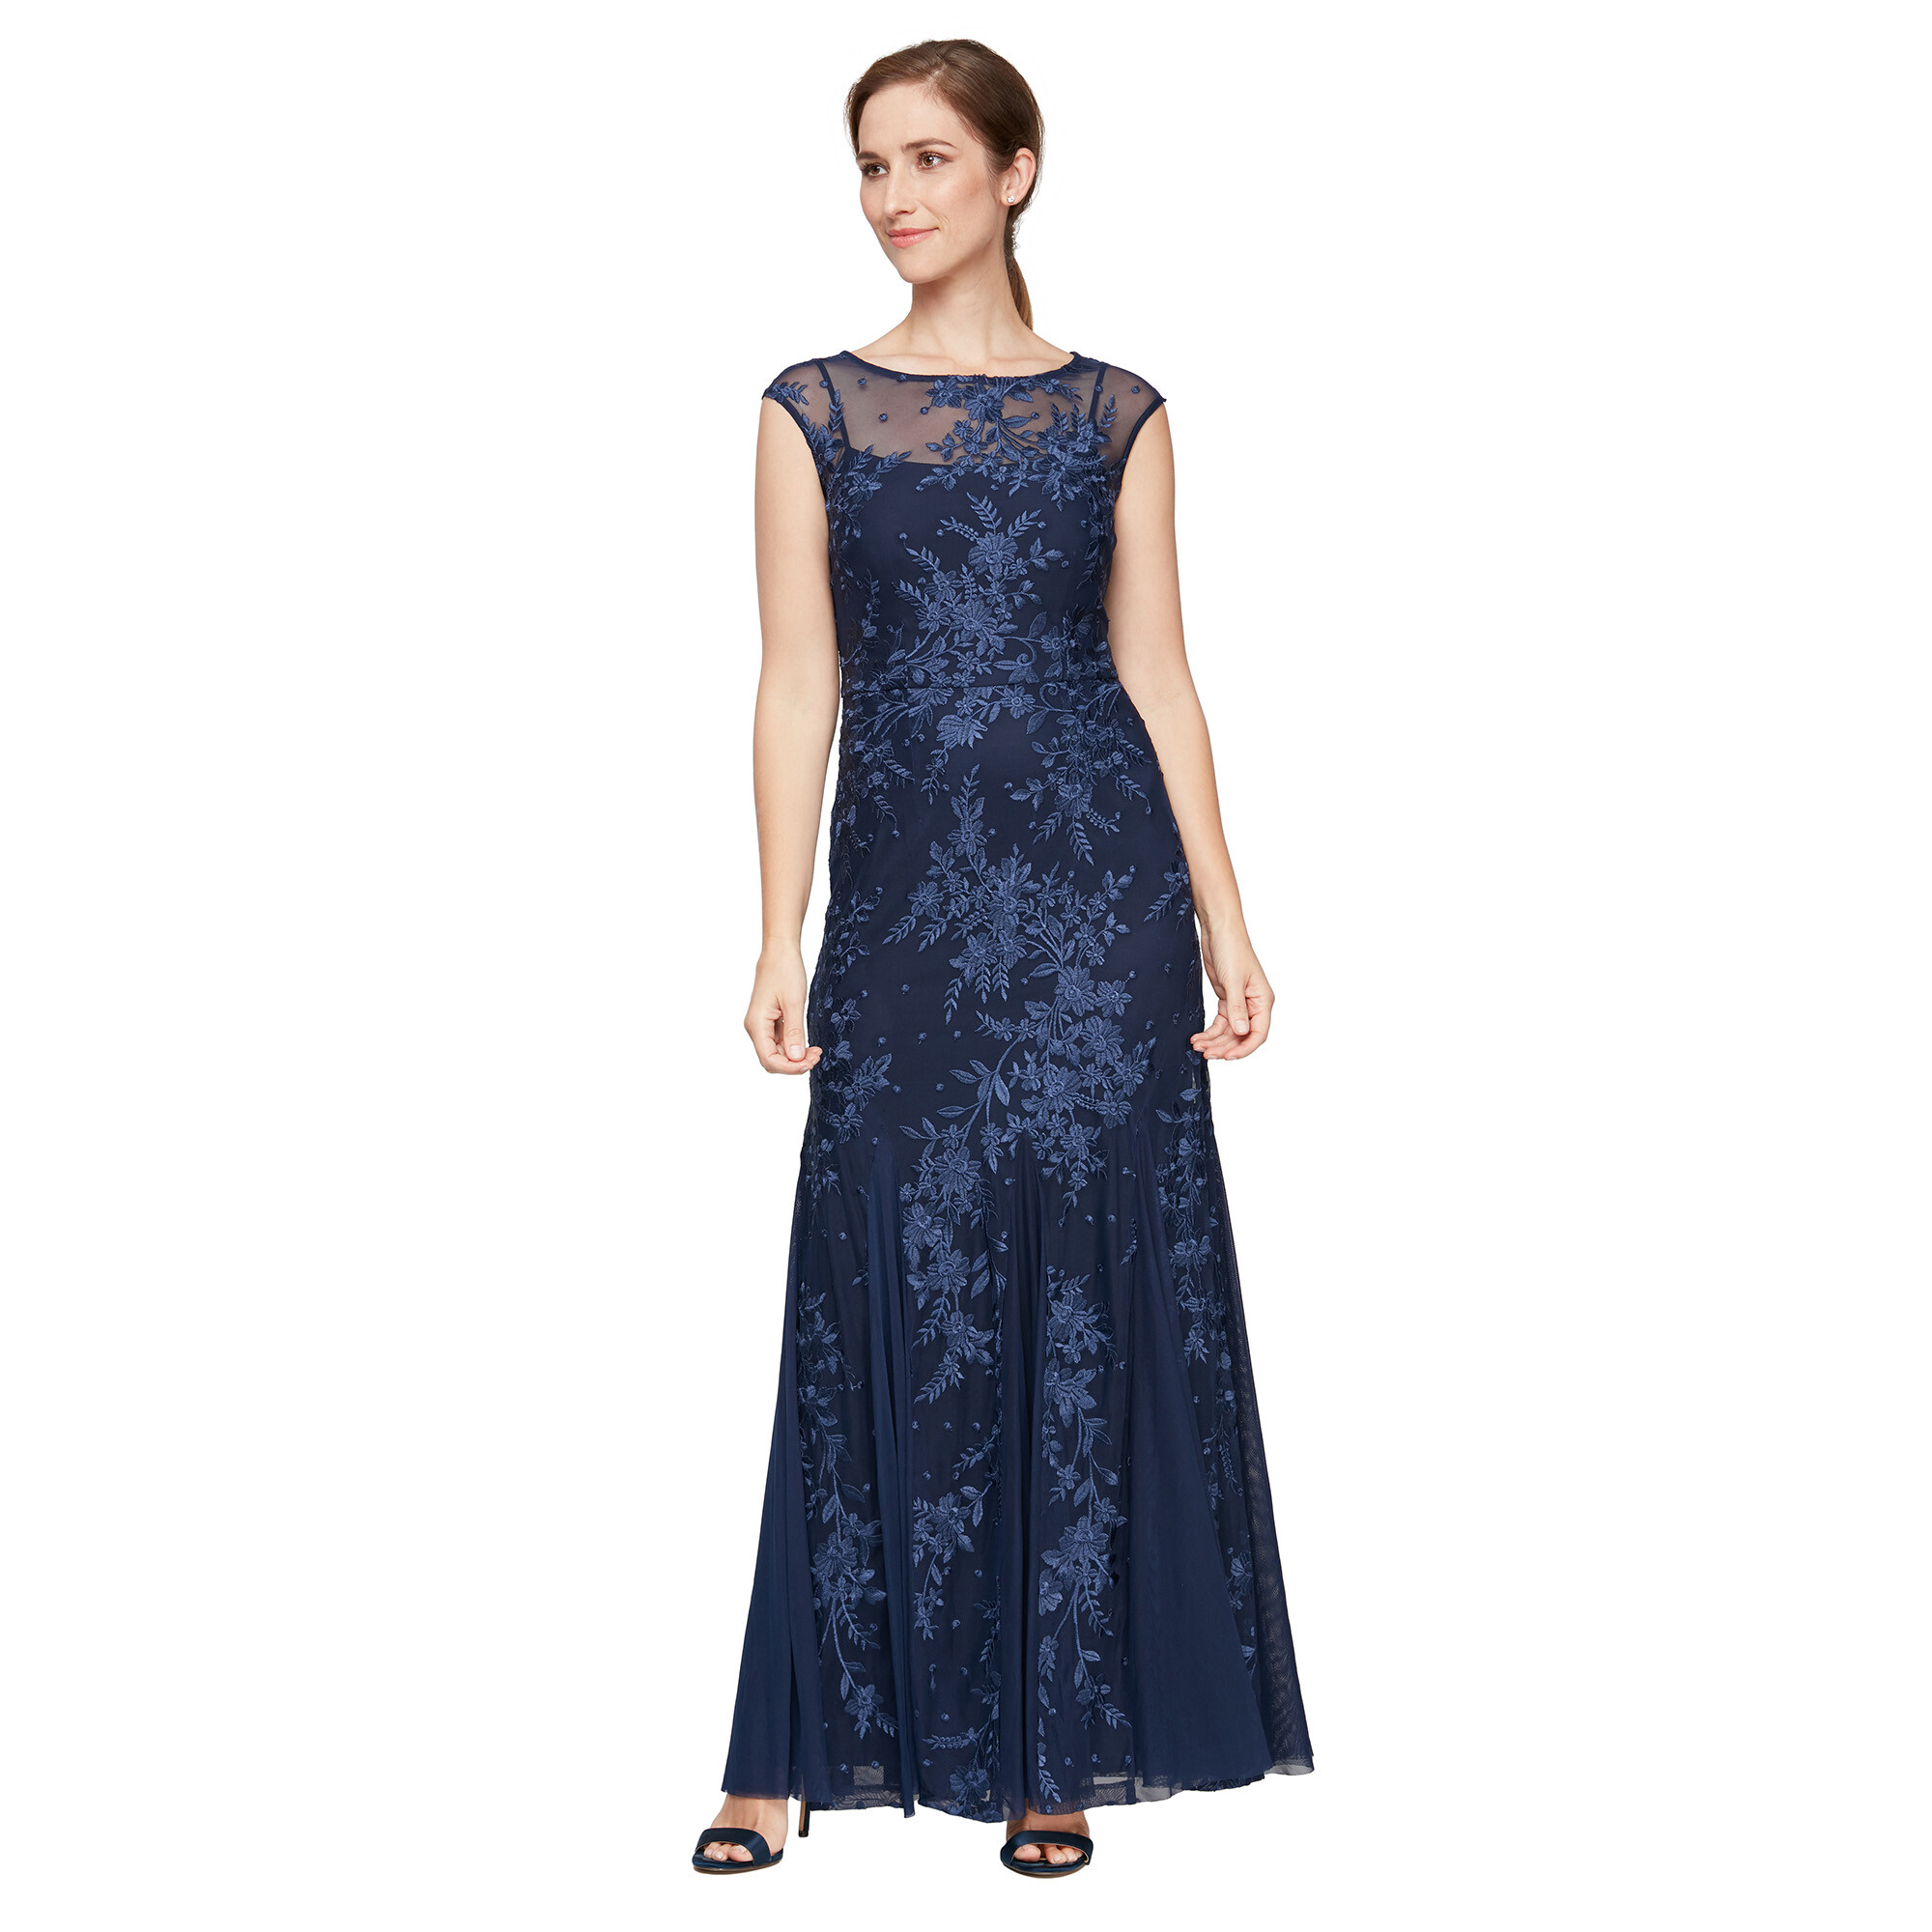 Imbracaminte Femei Alex Evenings Long Cap Sleeve Embroidered Dress with Illusion Neckline and Godet Detail Skirt Navy image